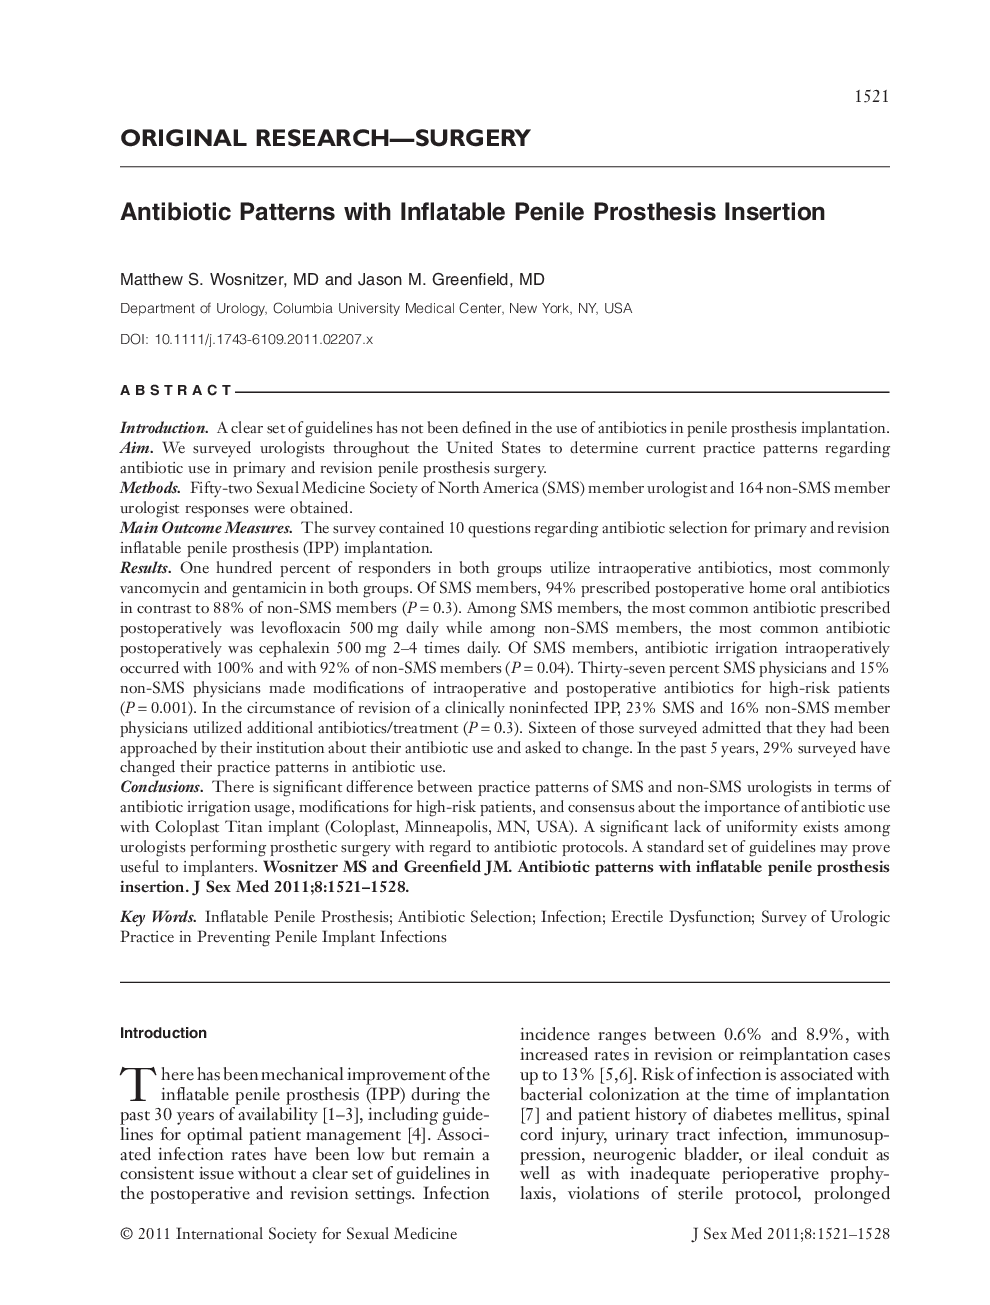 Antibiotic Patterns with Inflatable Penile Prosthesis Insertion